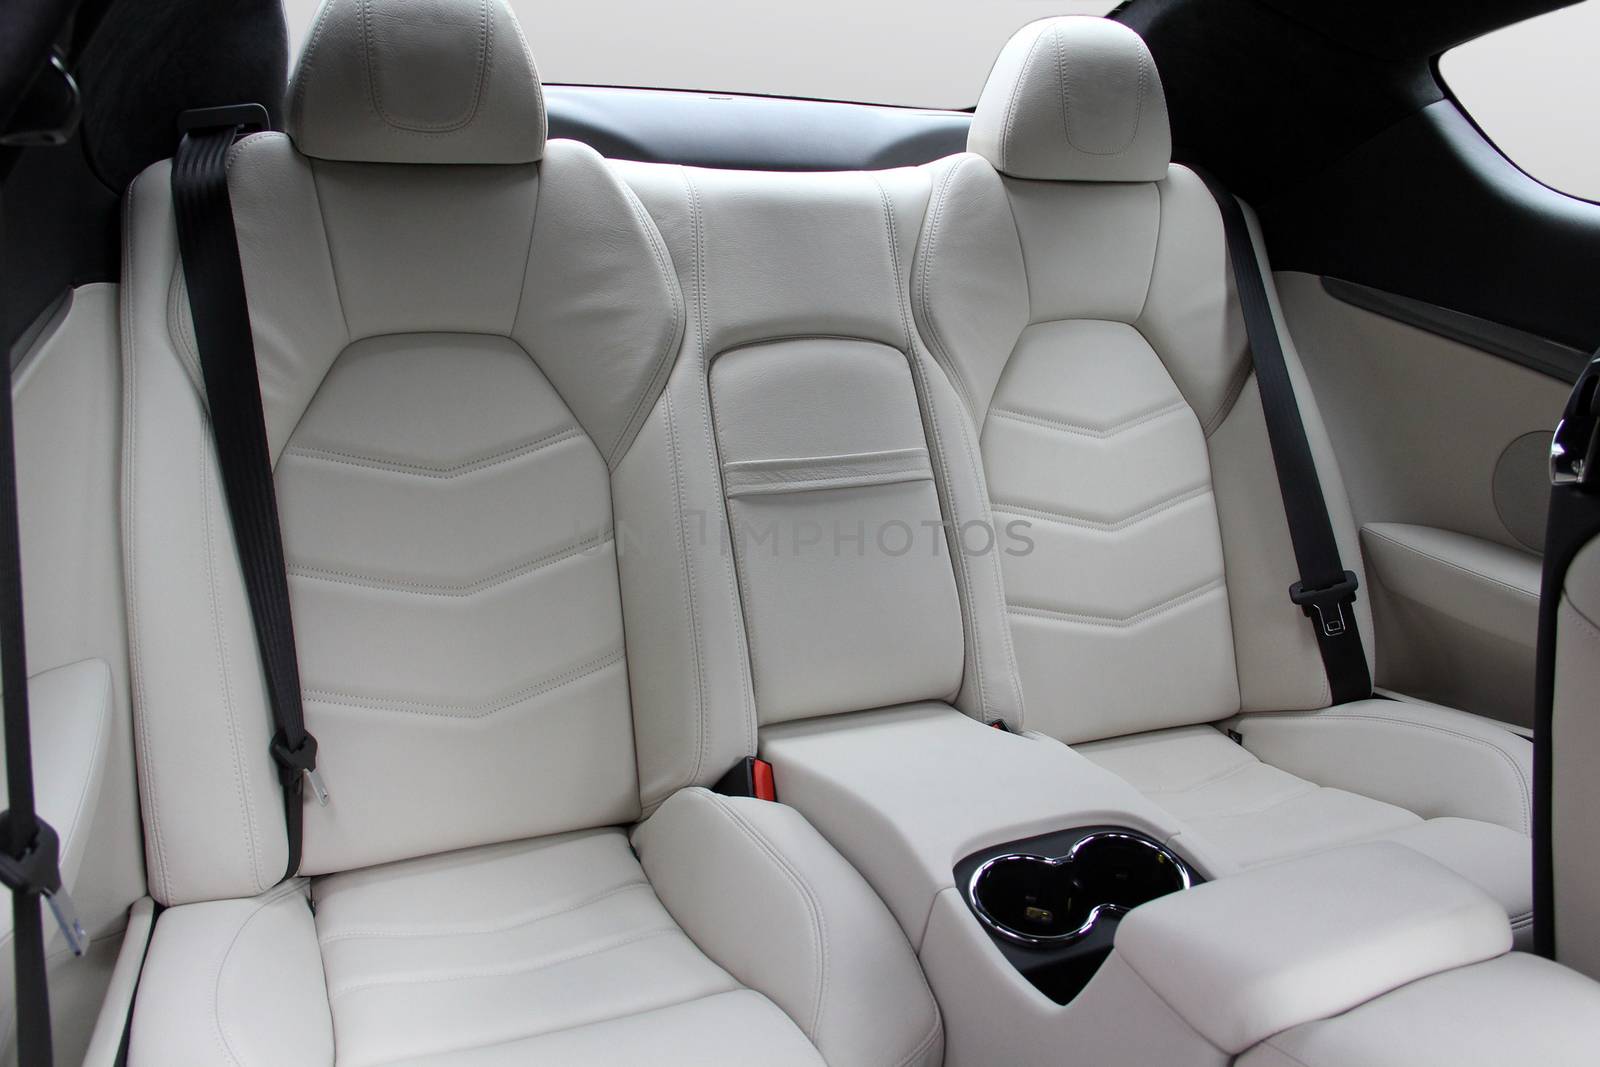 Rear seats covered with fabric in a luxury car